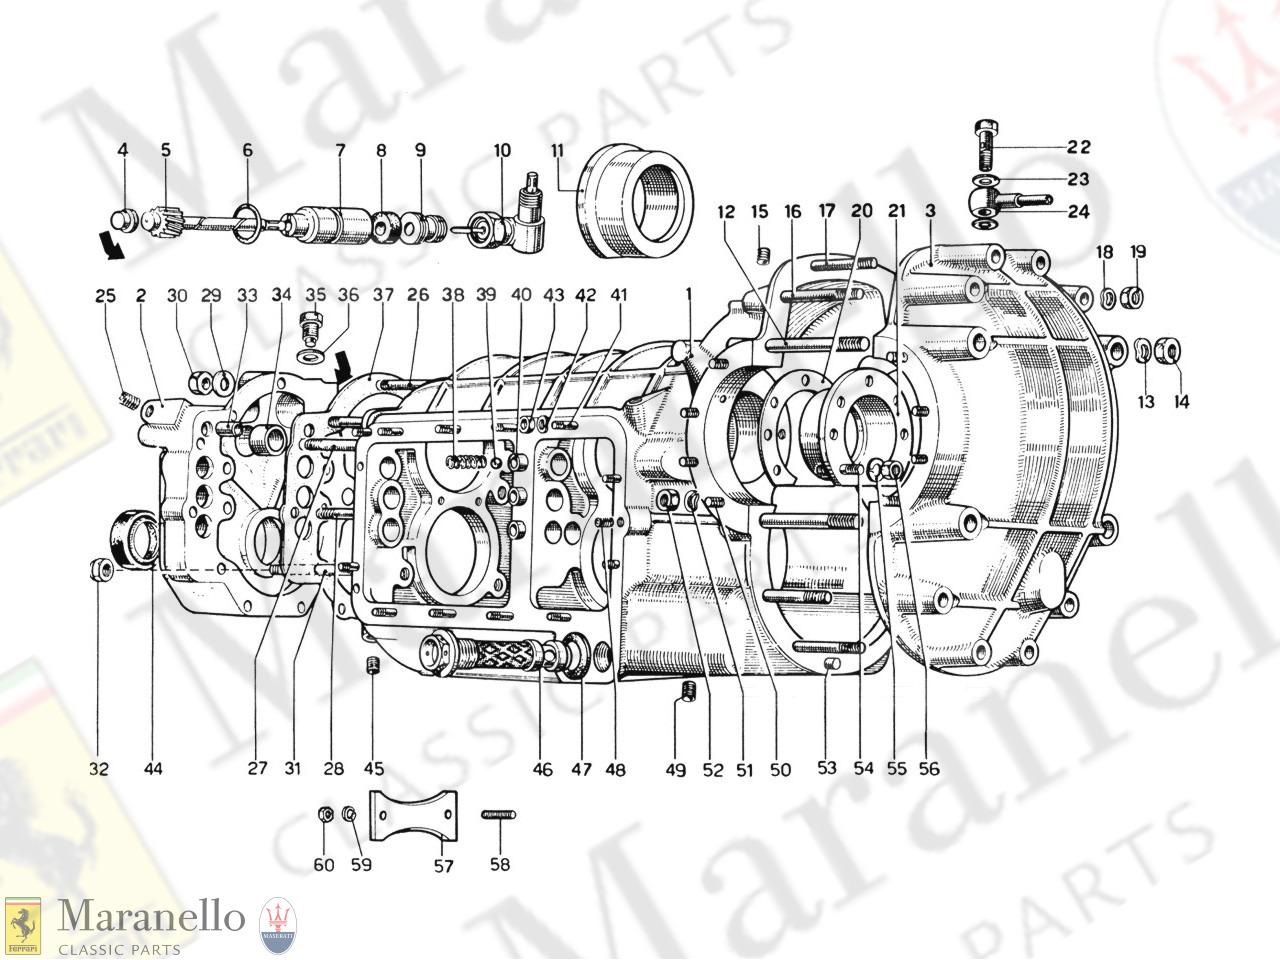 017 - Transmission Case - Differential